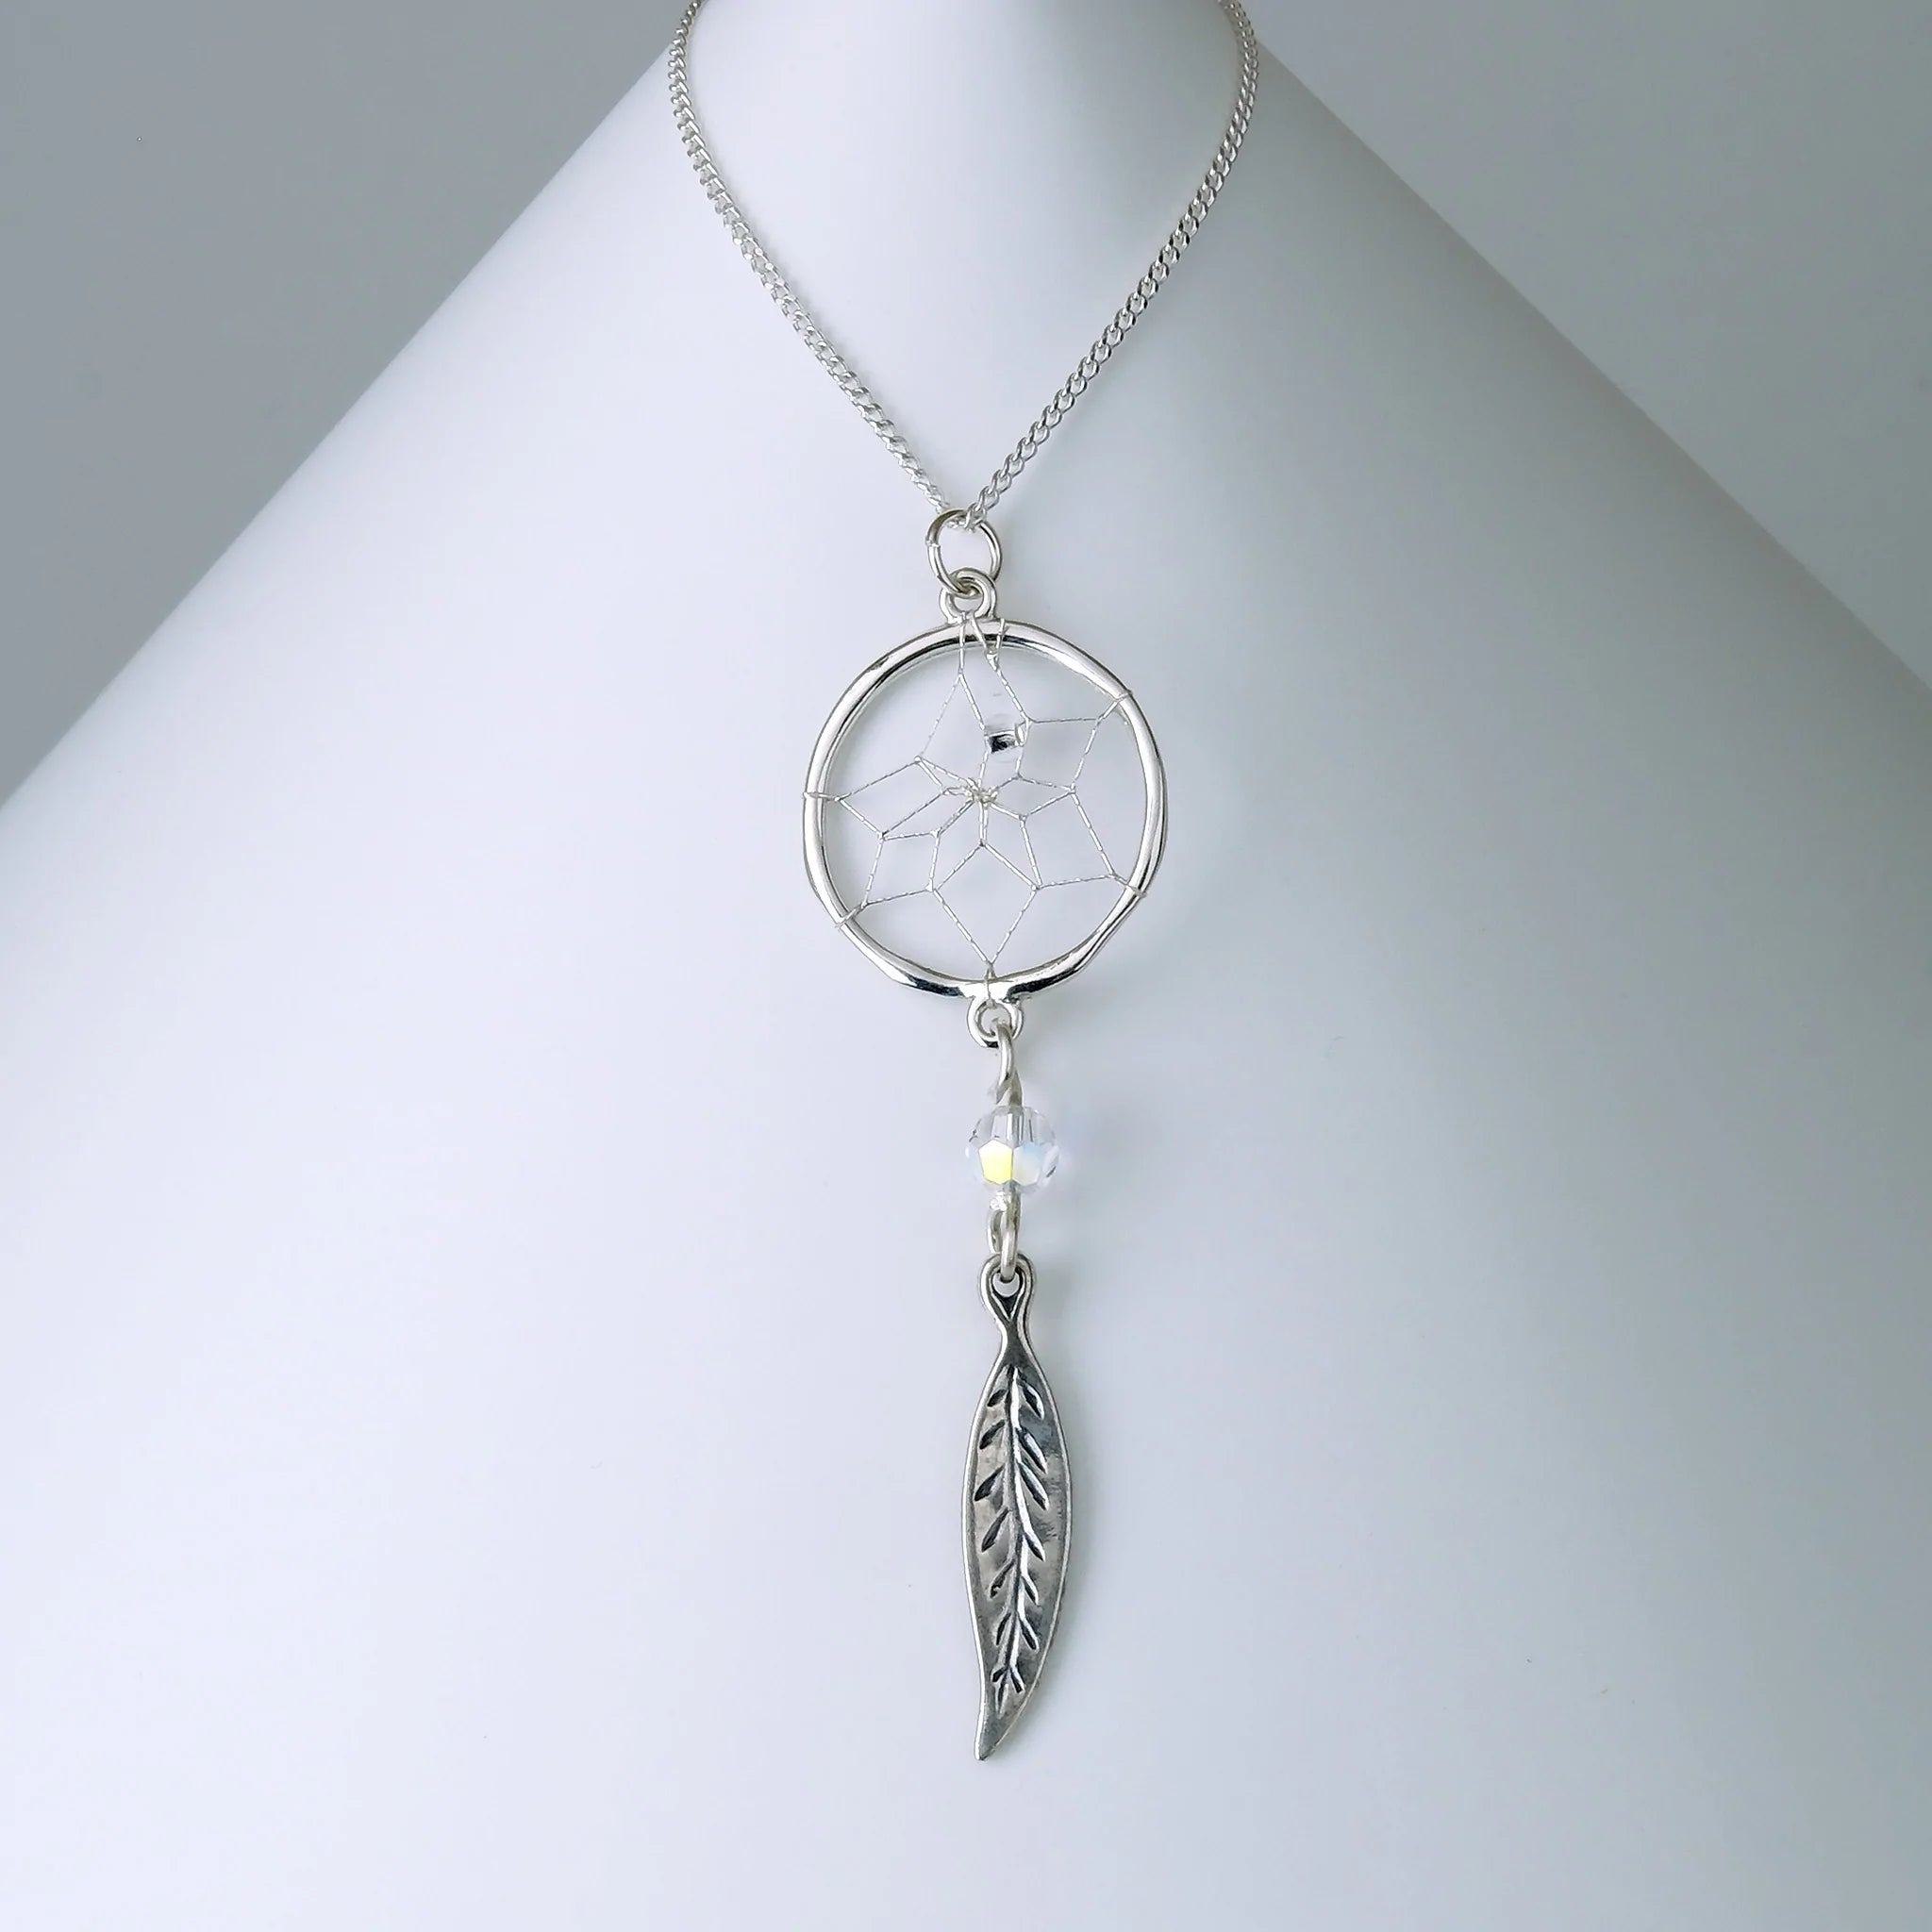 Silver Dreamcatcher pendant with Swarovski and Feather